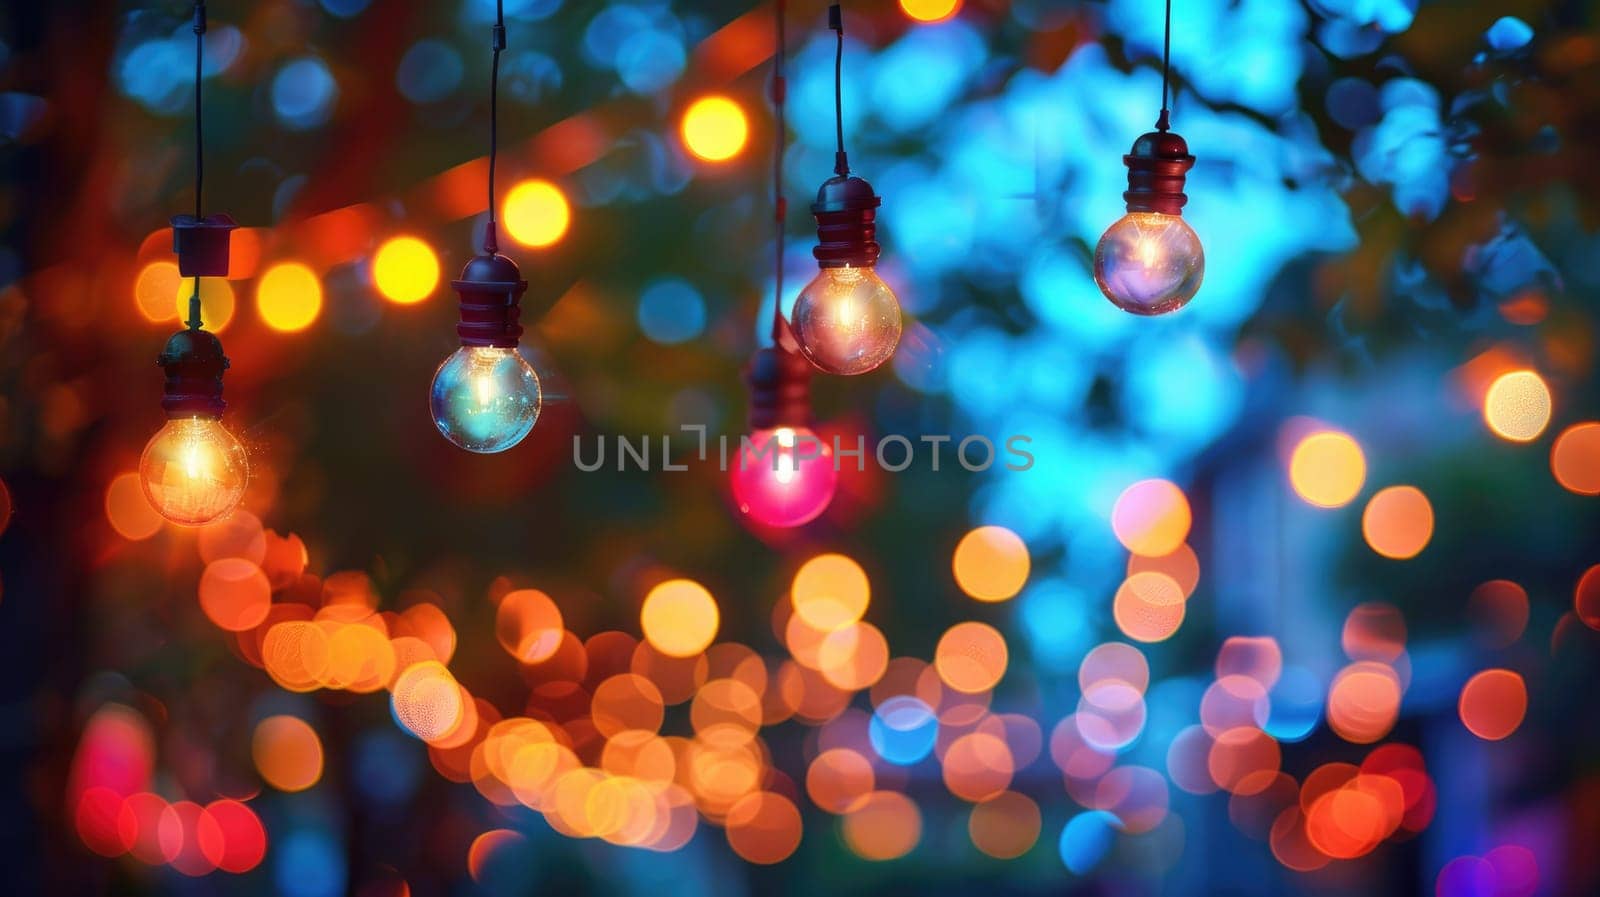 A bunch of colorful lights hanging from a tree. The lights are of different colors and are hanging at different heights. The scene has a festive and lively mood, as if it's a celebration or a party